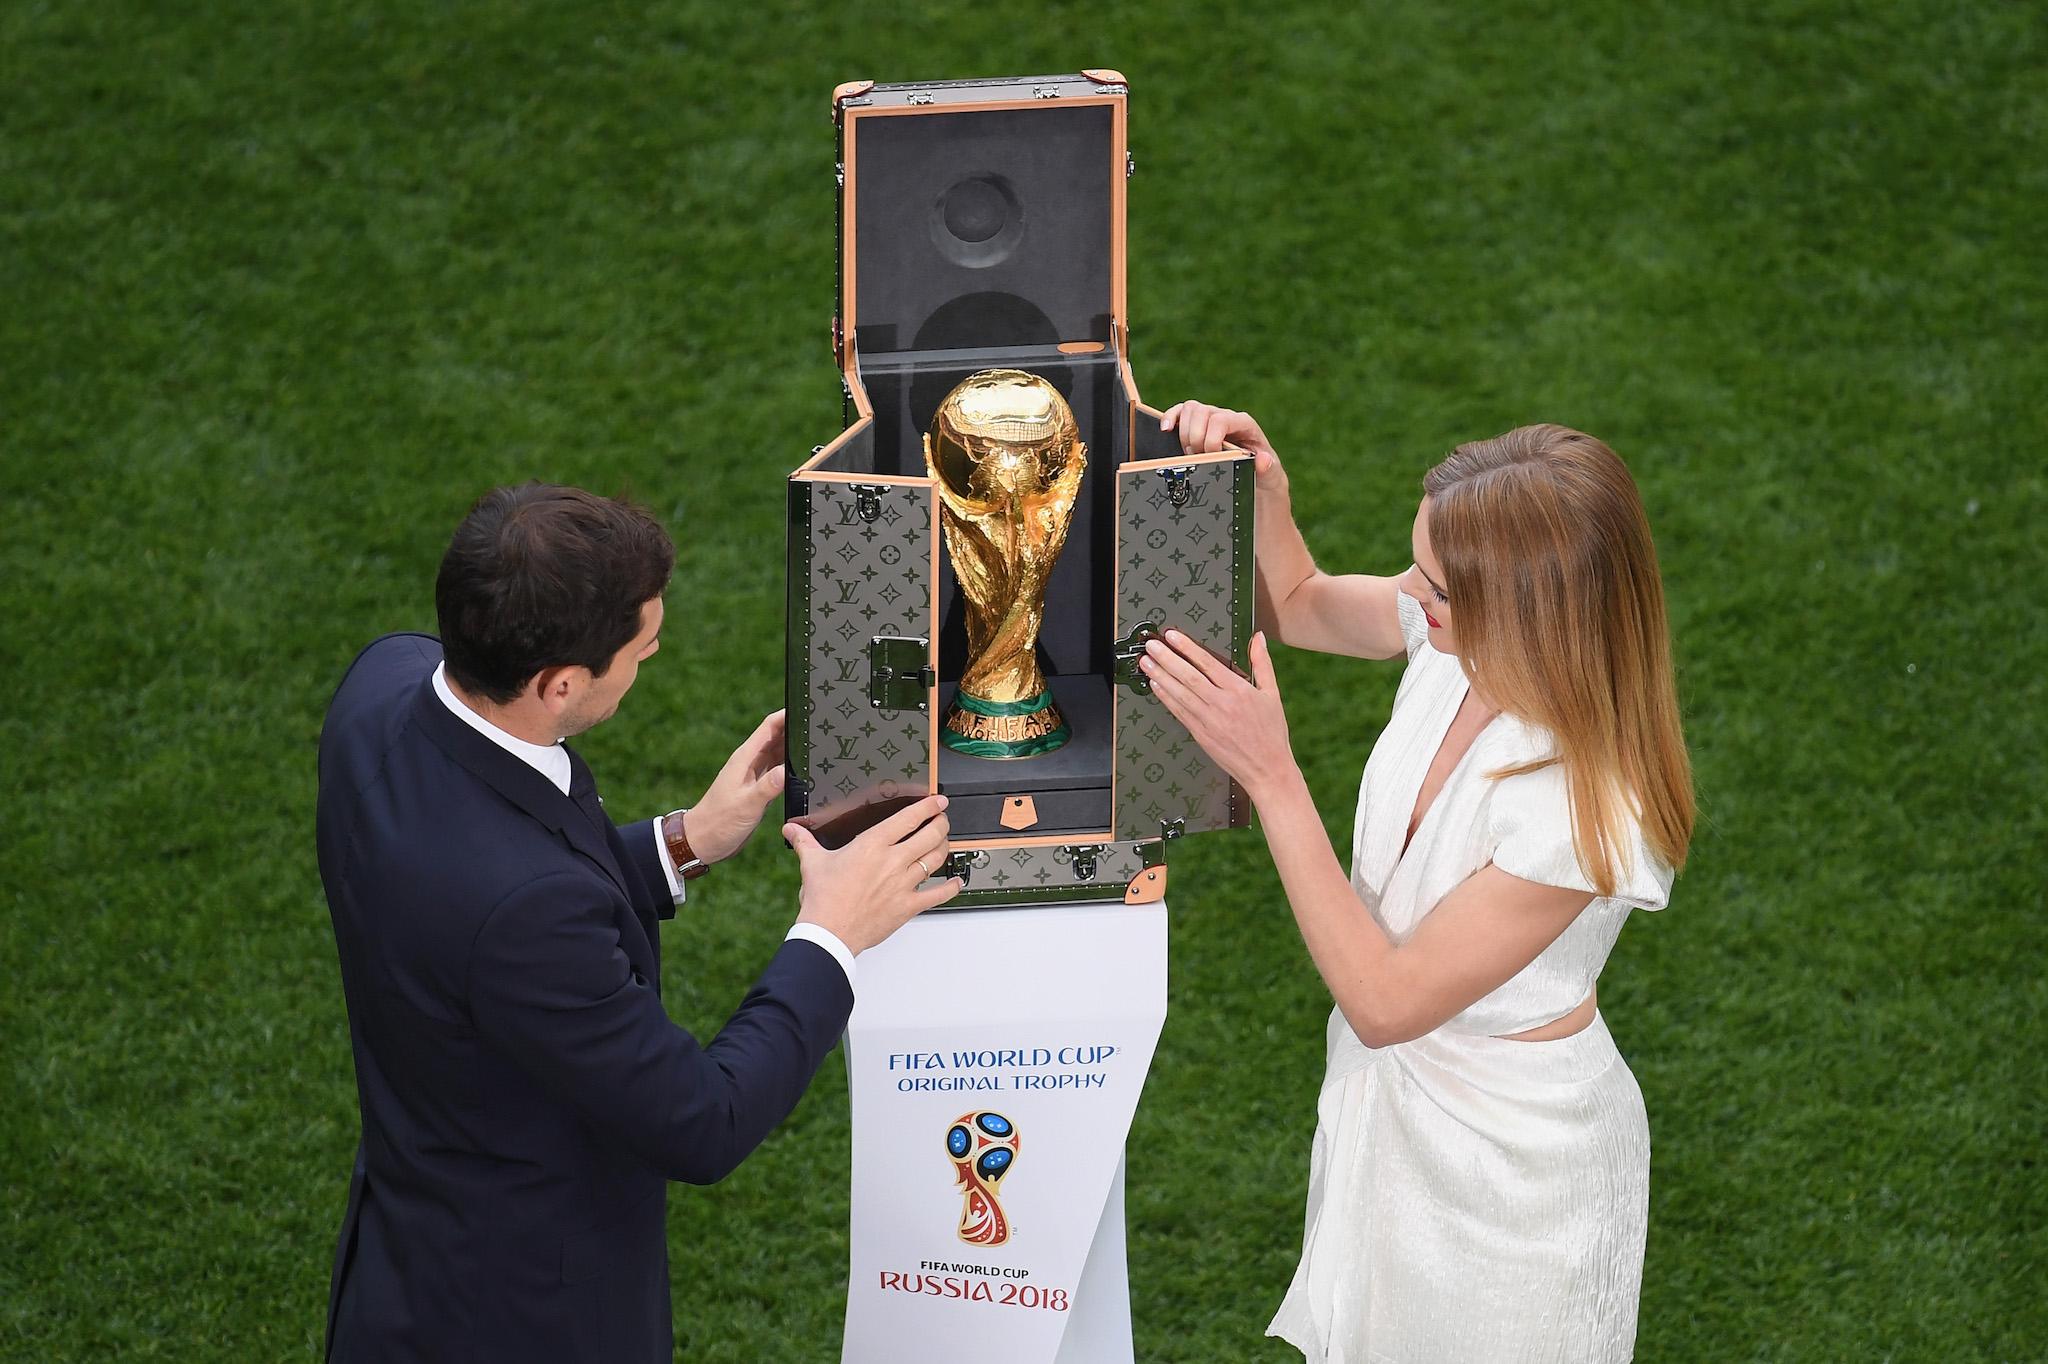 Spain legend Iker Casillas and model Natalia Vodianova show the World Cup trophy prior to the 2018 FIFA World Cup Russia group A match between Russia and Saudi Arabia